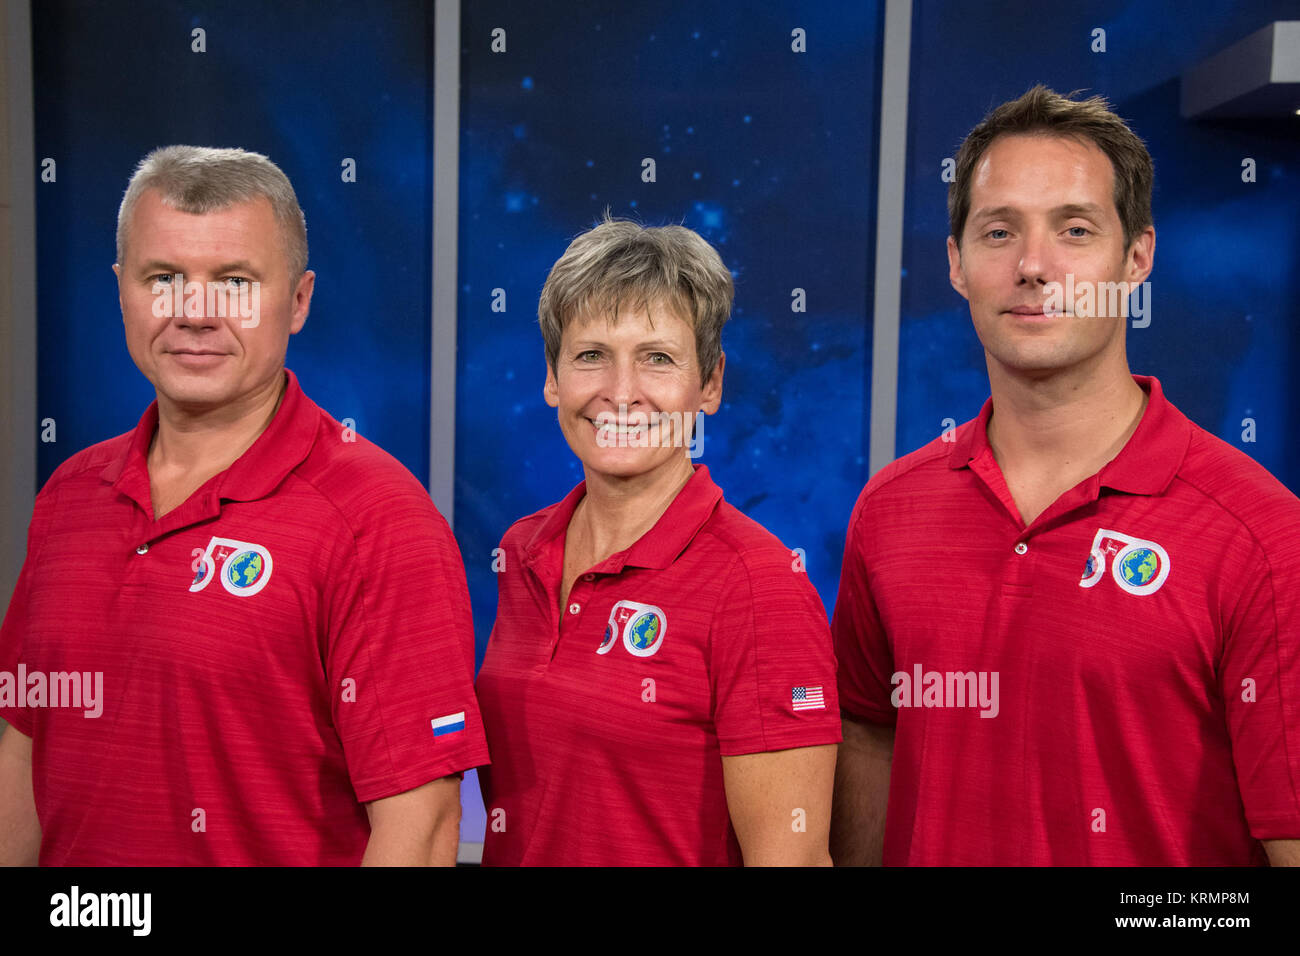 Date: 08-30-16 Location: Bldg 2 South, Studio B Subject: Expedition 50/51 Crew Press Conference with Peggy Whitson, Oleg Novitsky and Thomas Pesquet Soyuz MS-03 crew Stock Photo